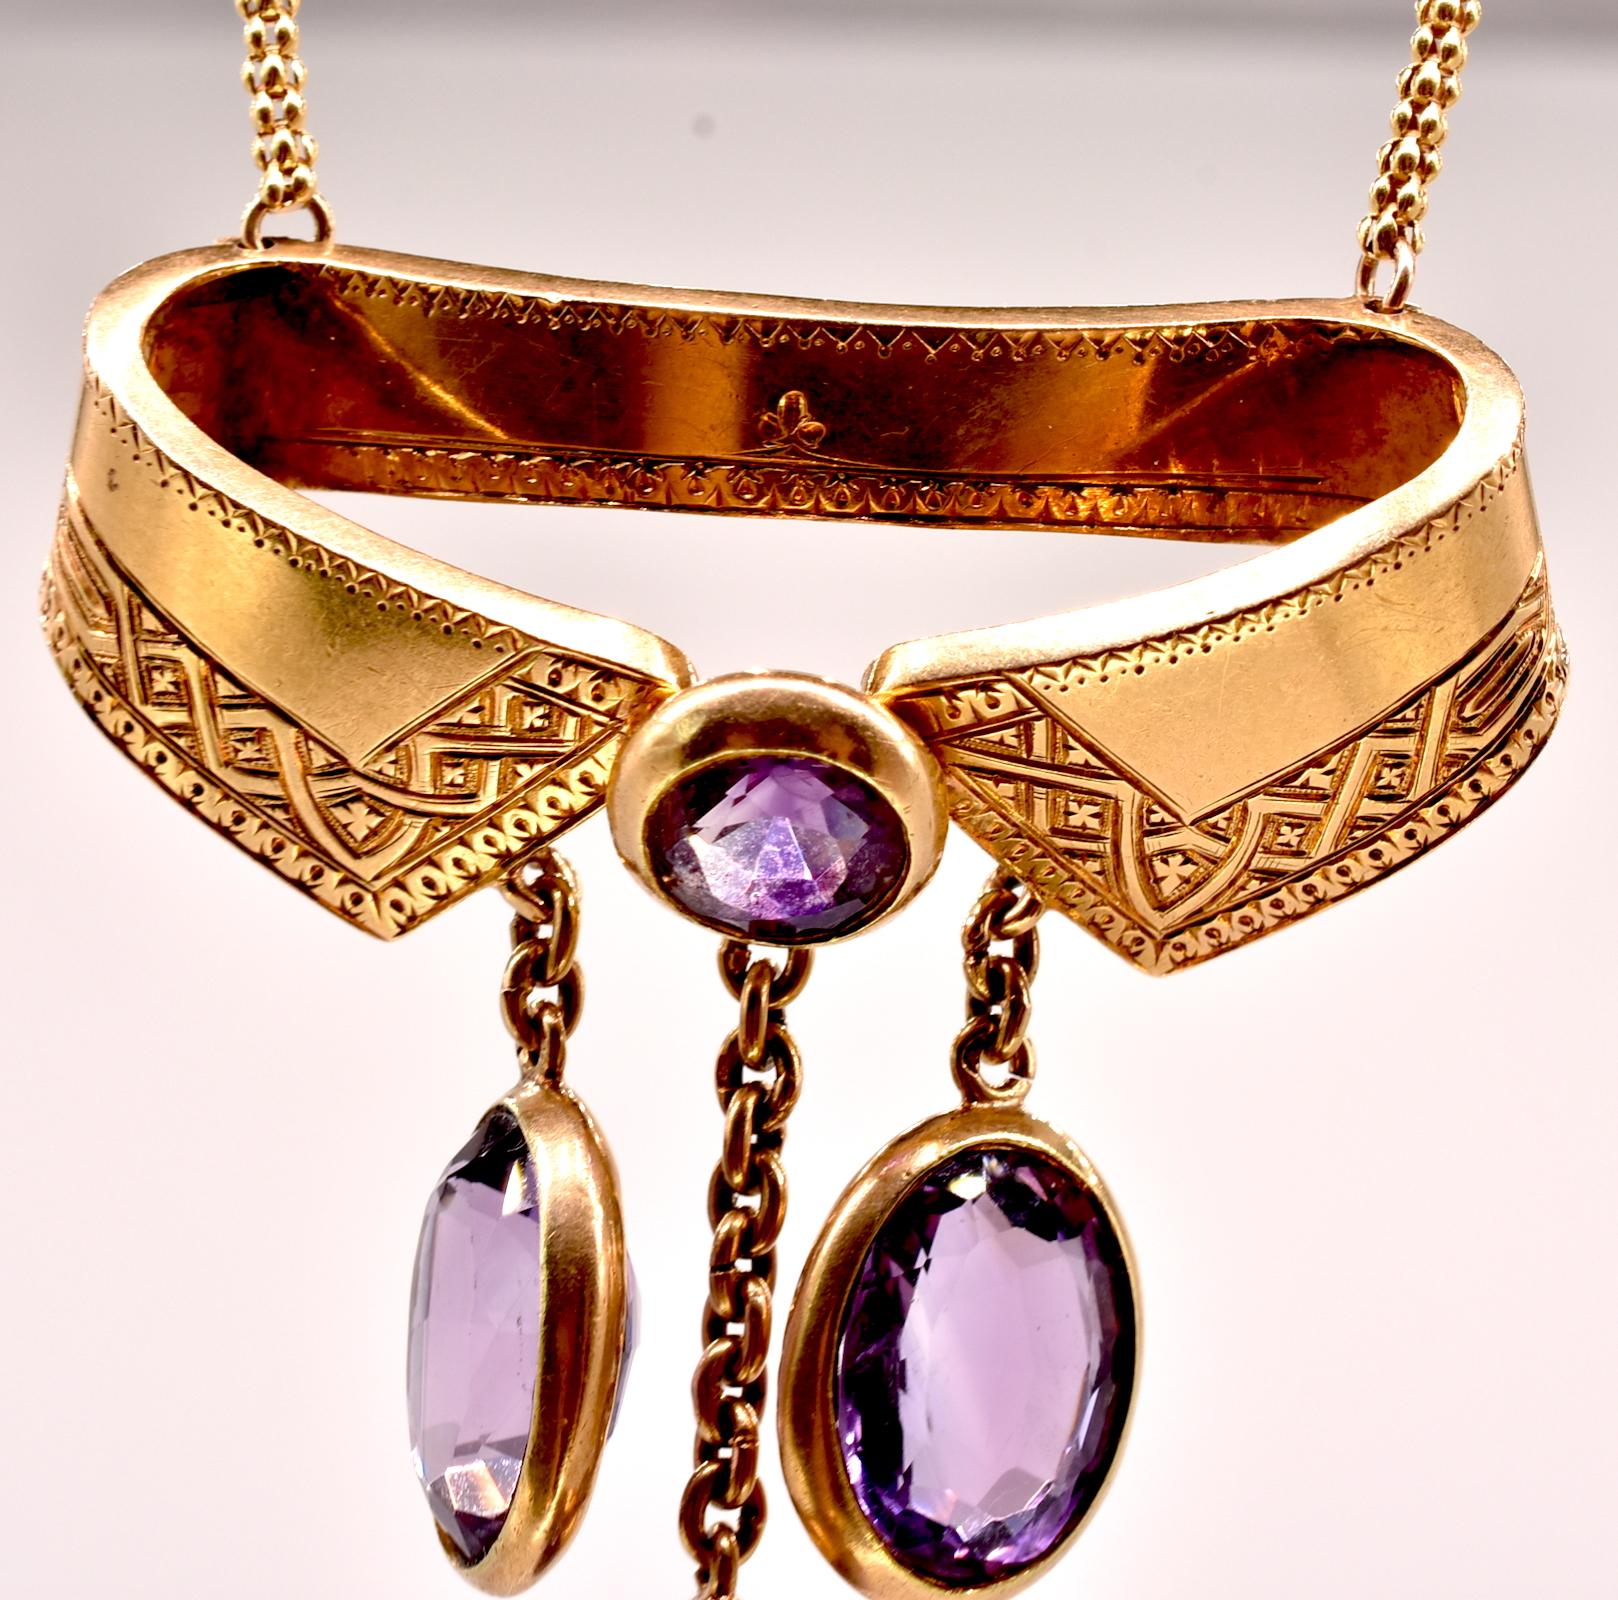 18K French gold collar necklace with 3 amethyst pendants hanging from a gold chain and 1 amethyst at the center of a replica of a gold 